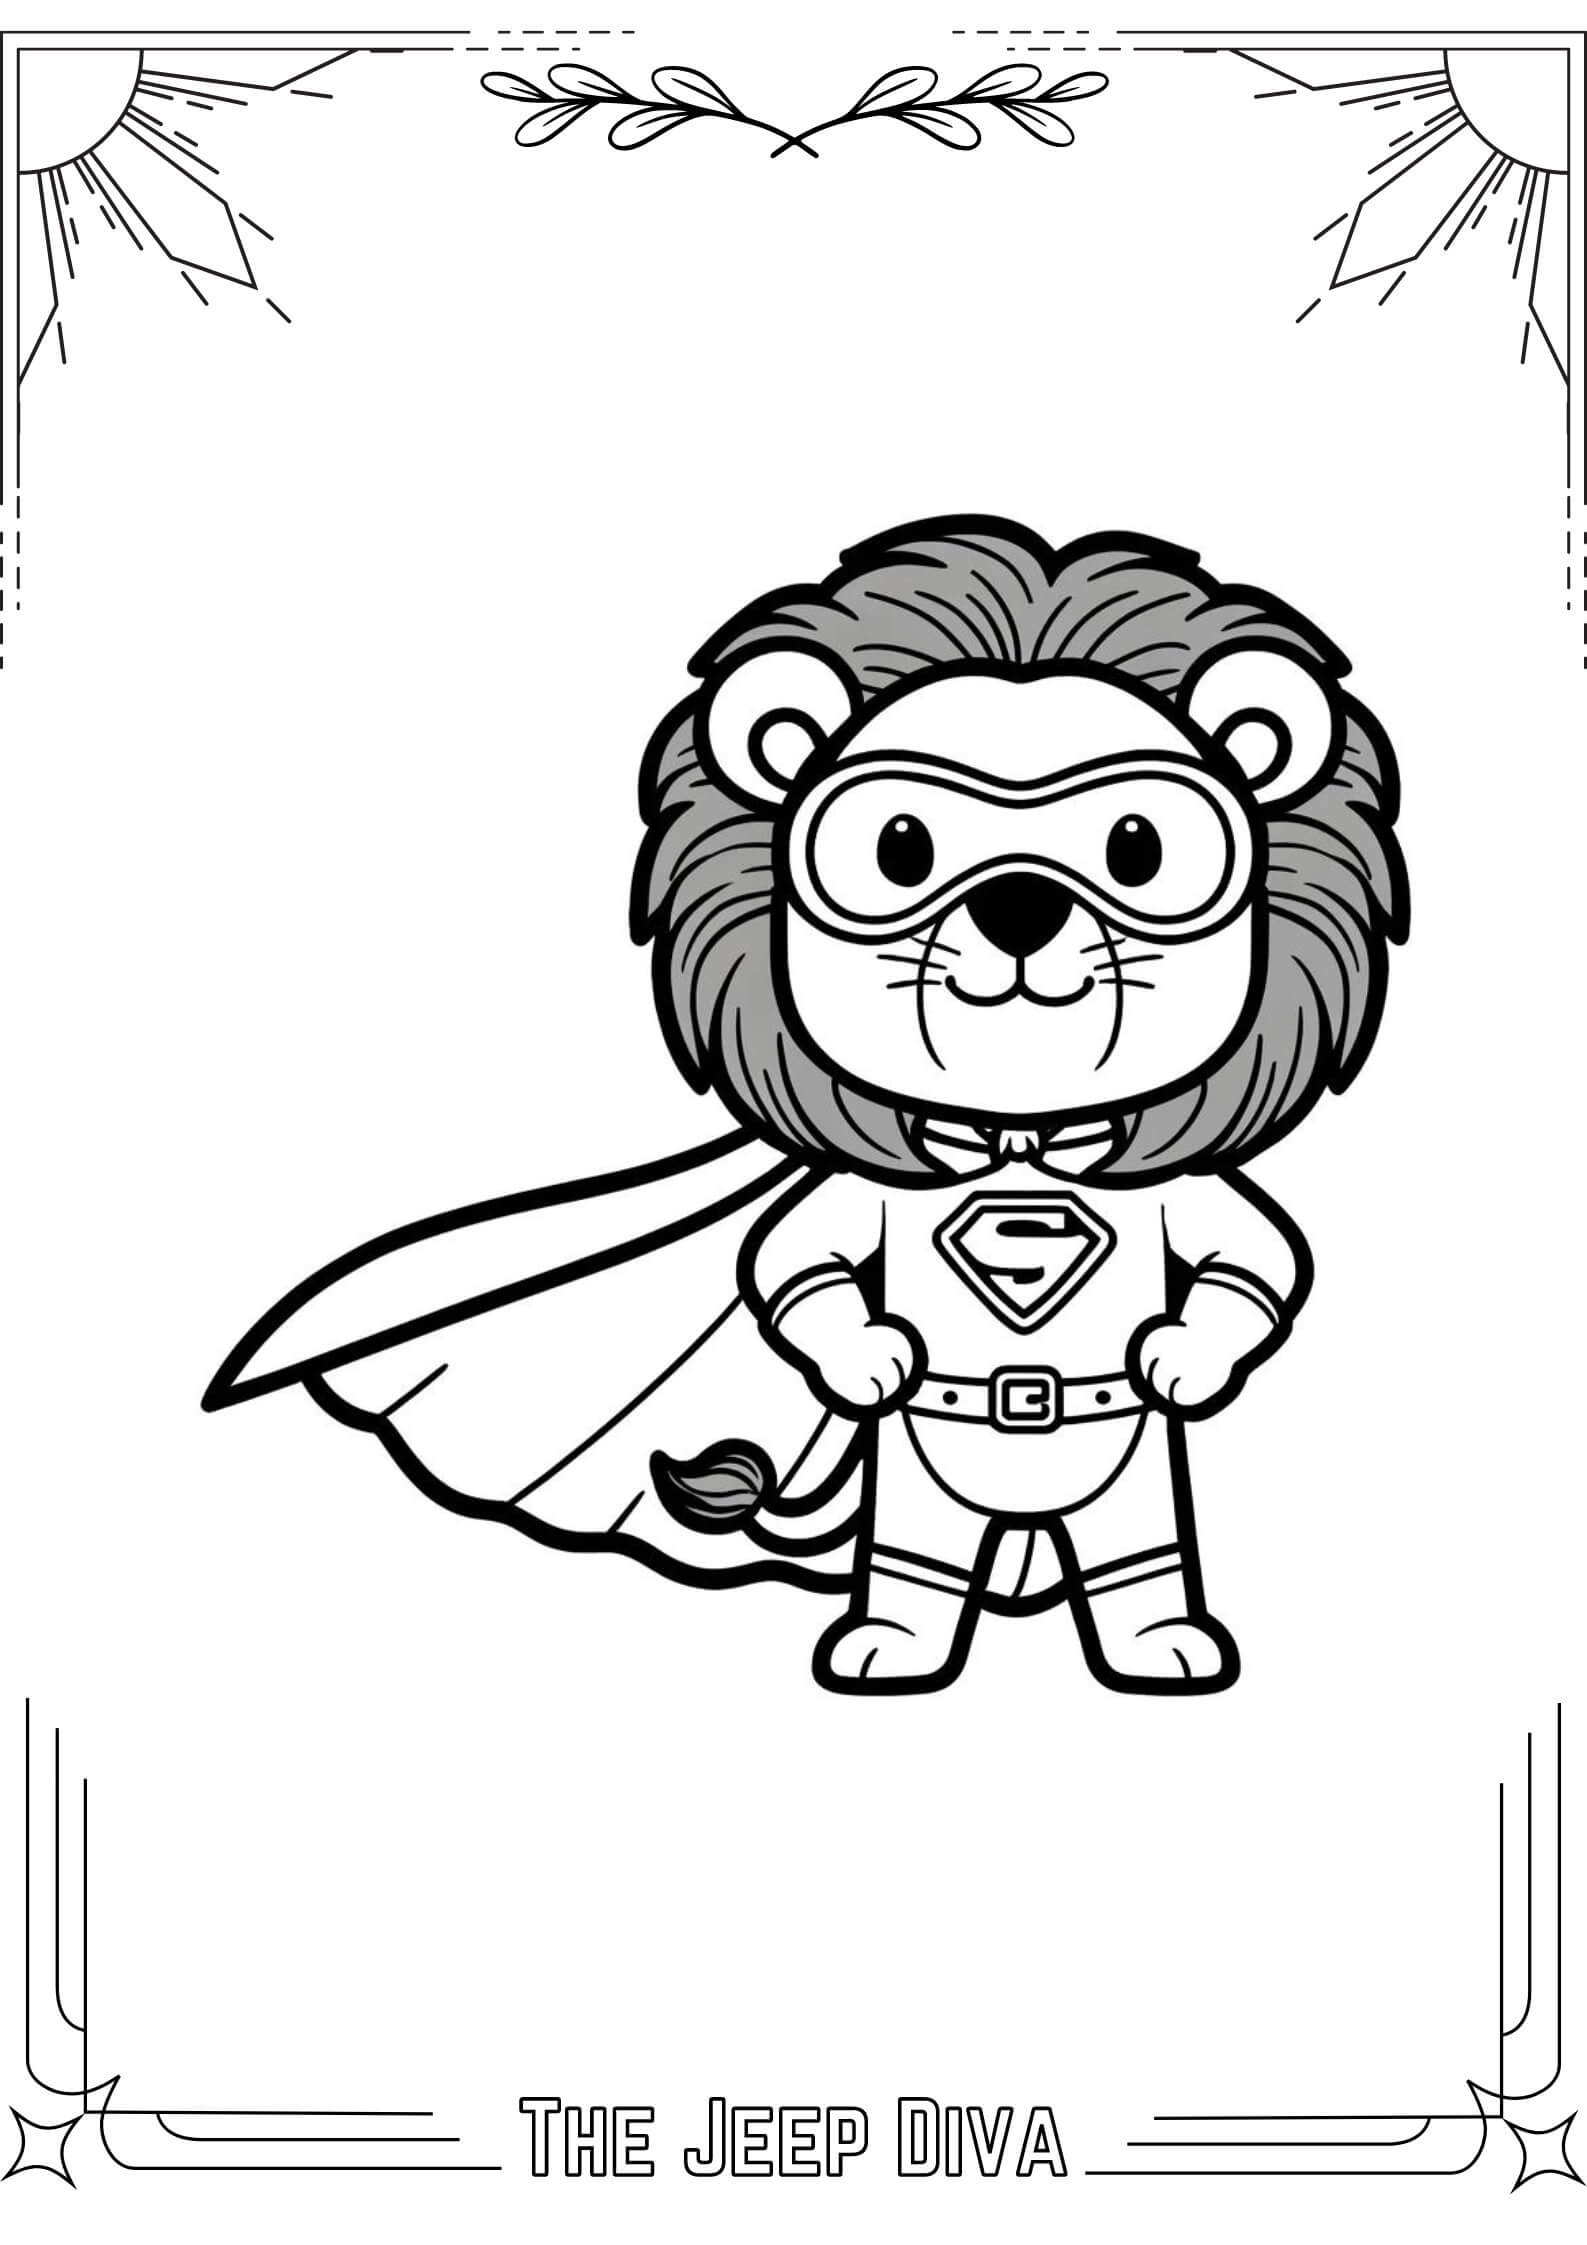 The Jeep Diva Coloring Page Lion Medium Difficulty 6